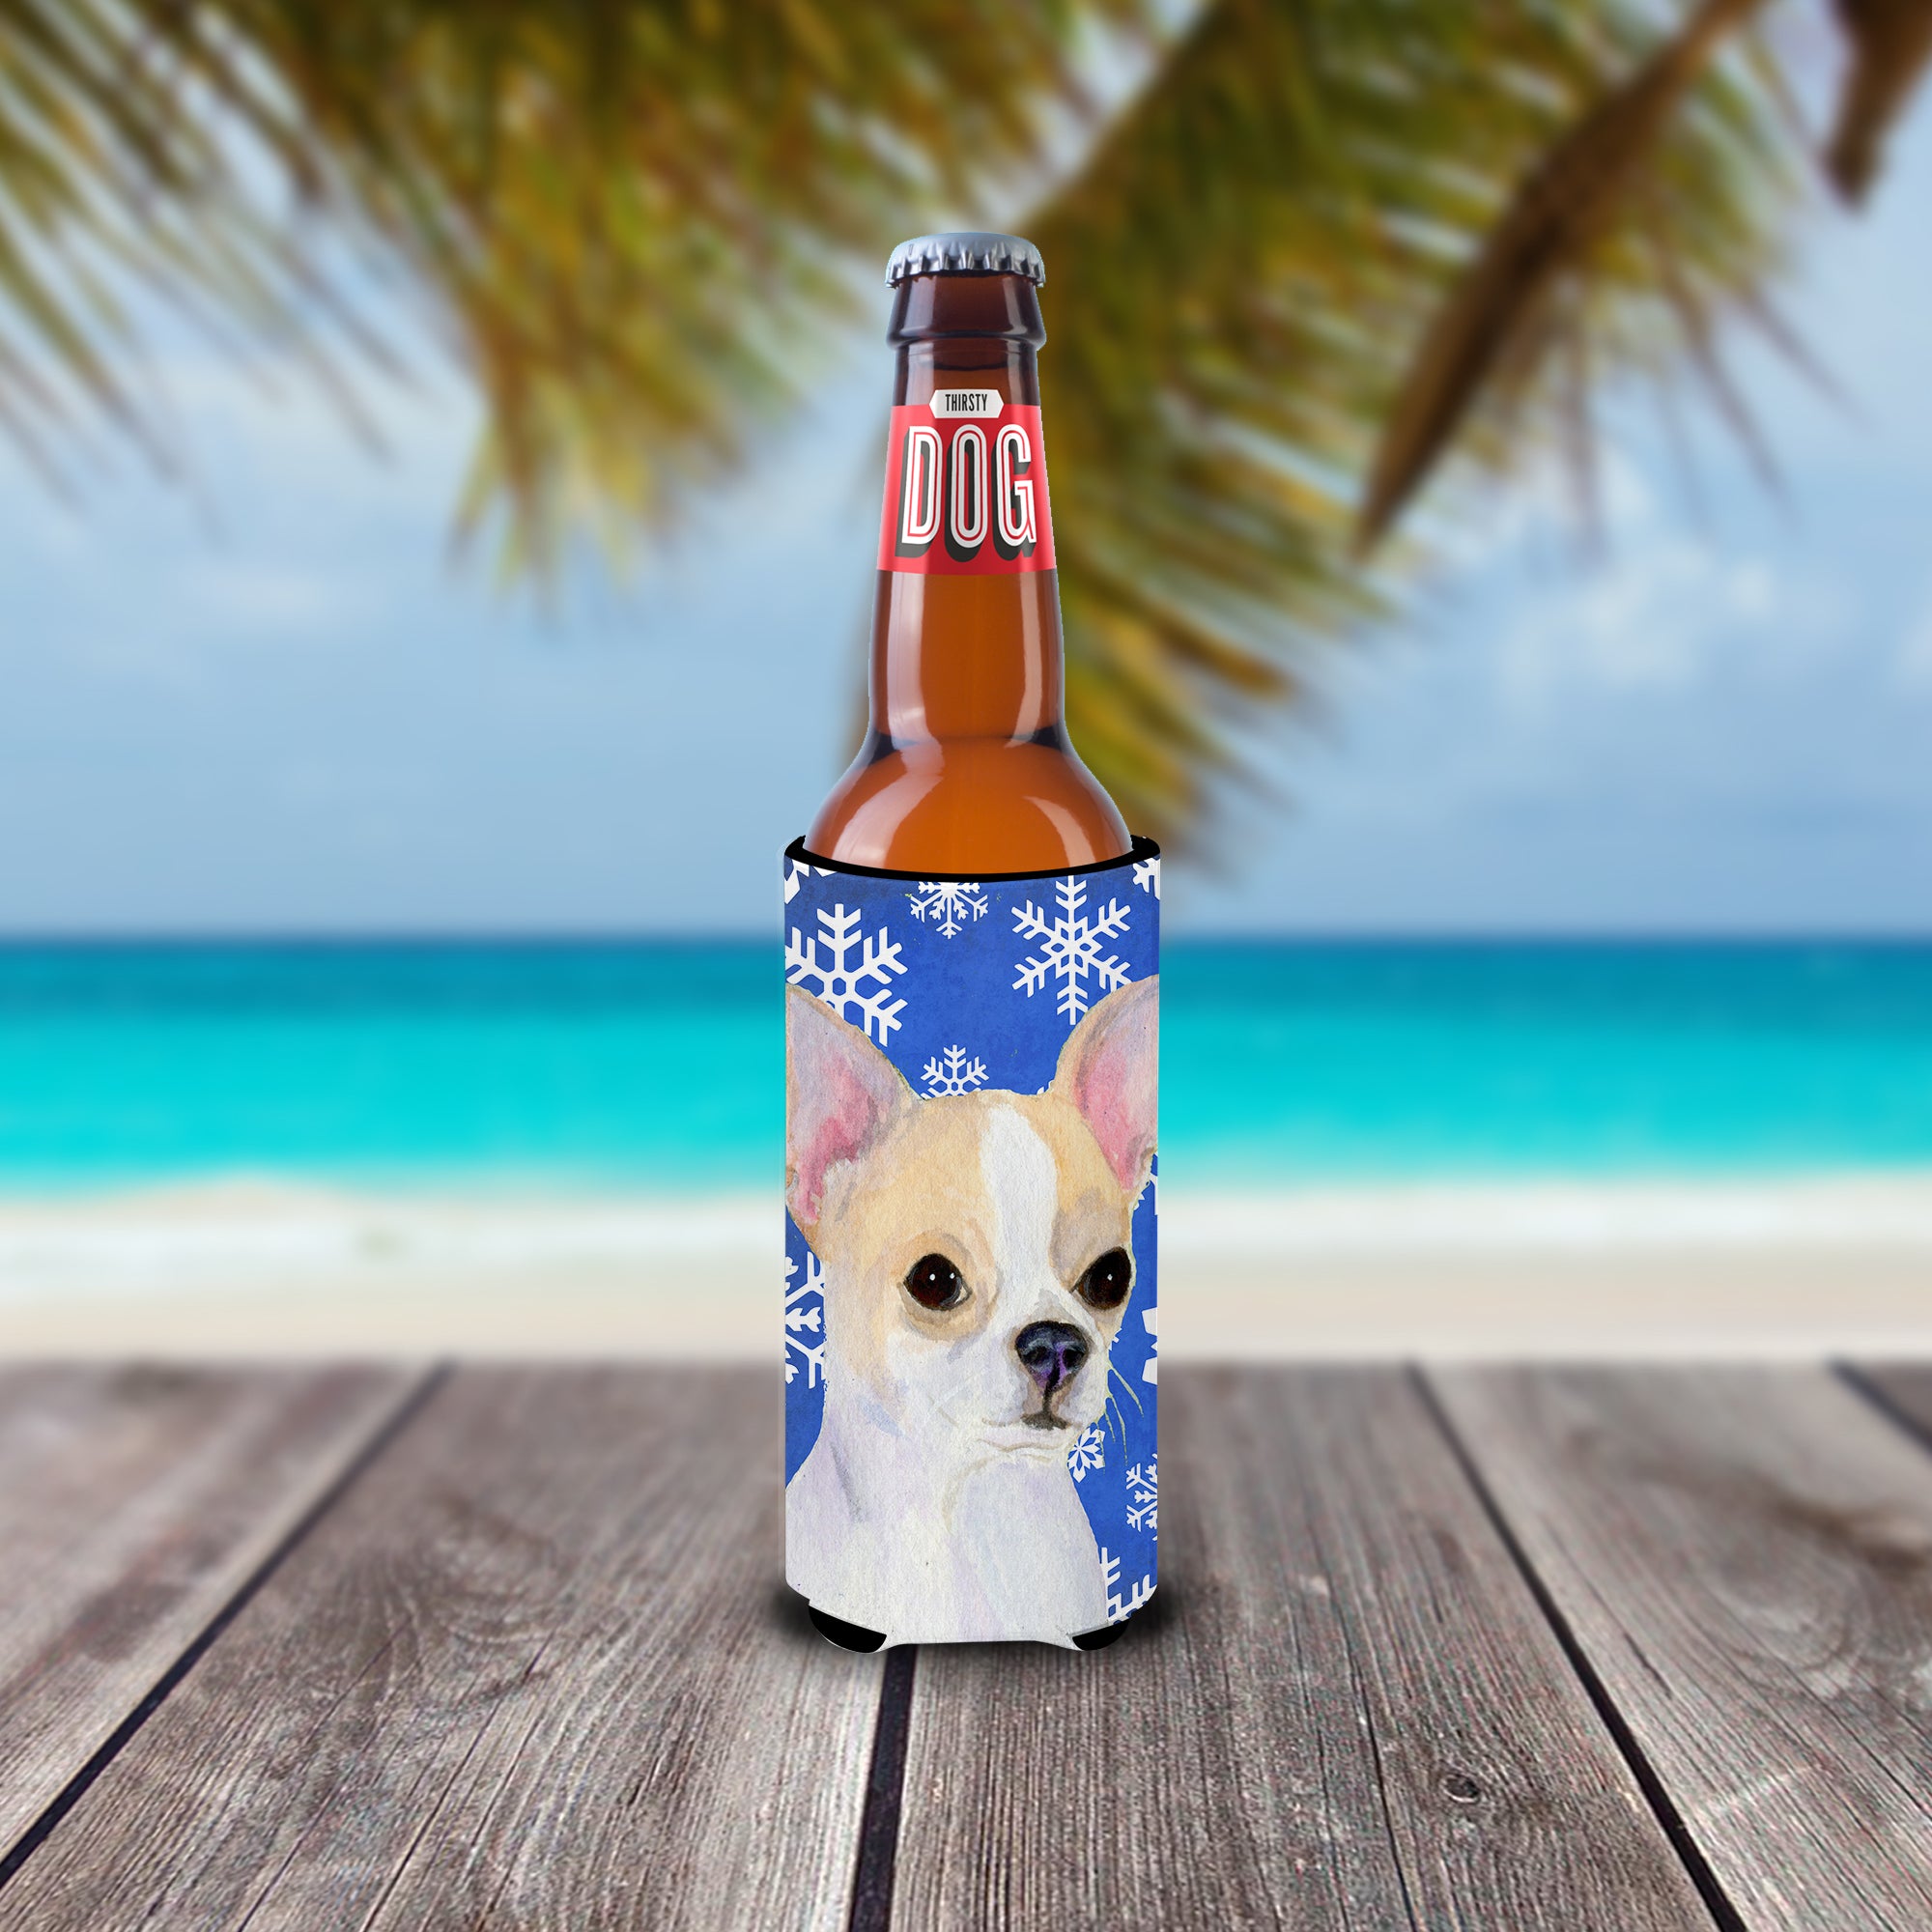 Chihuahua Winter Snowflakes Holiday Ultra Beverage Insulators for slim cans SS4612MUK.